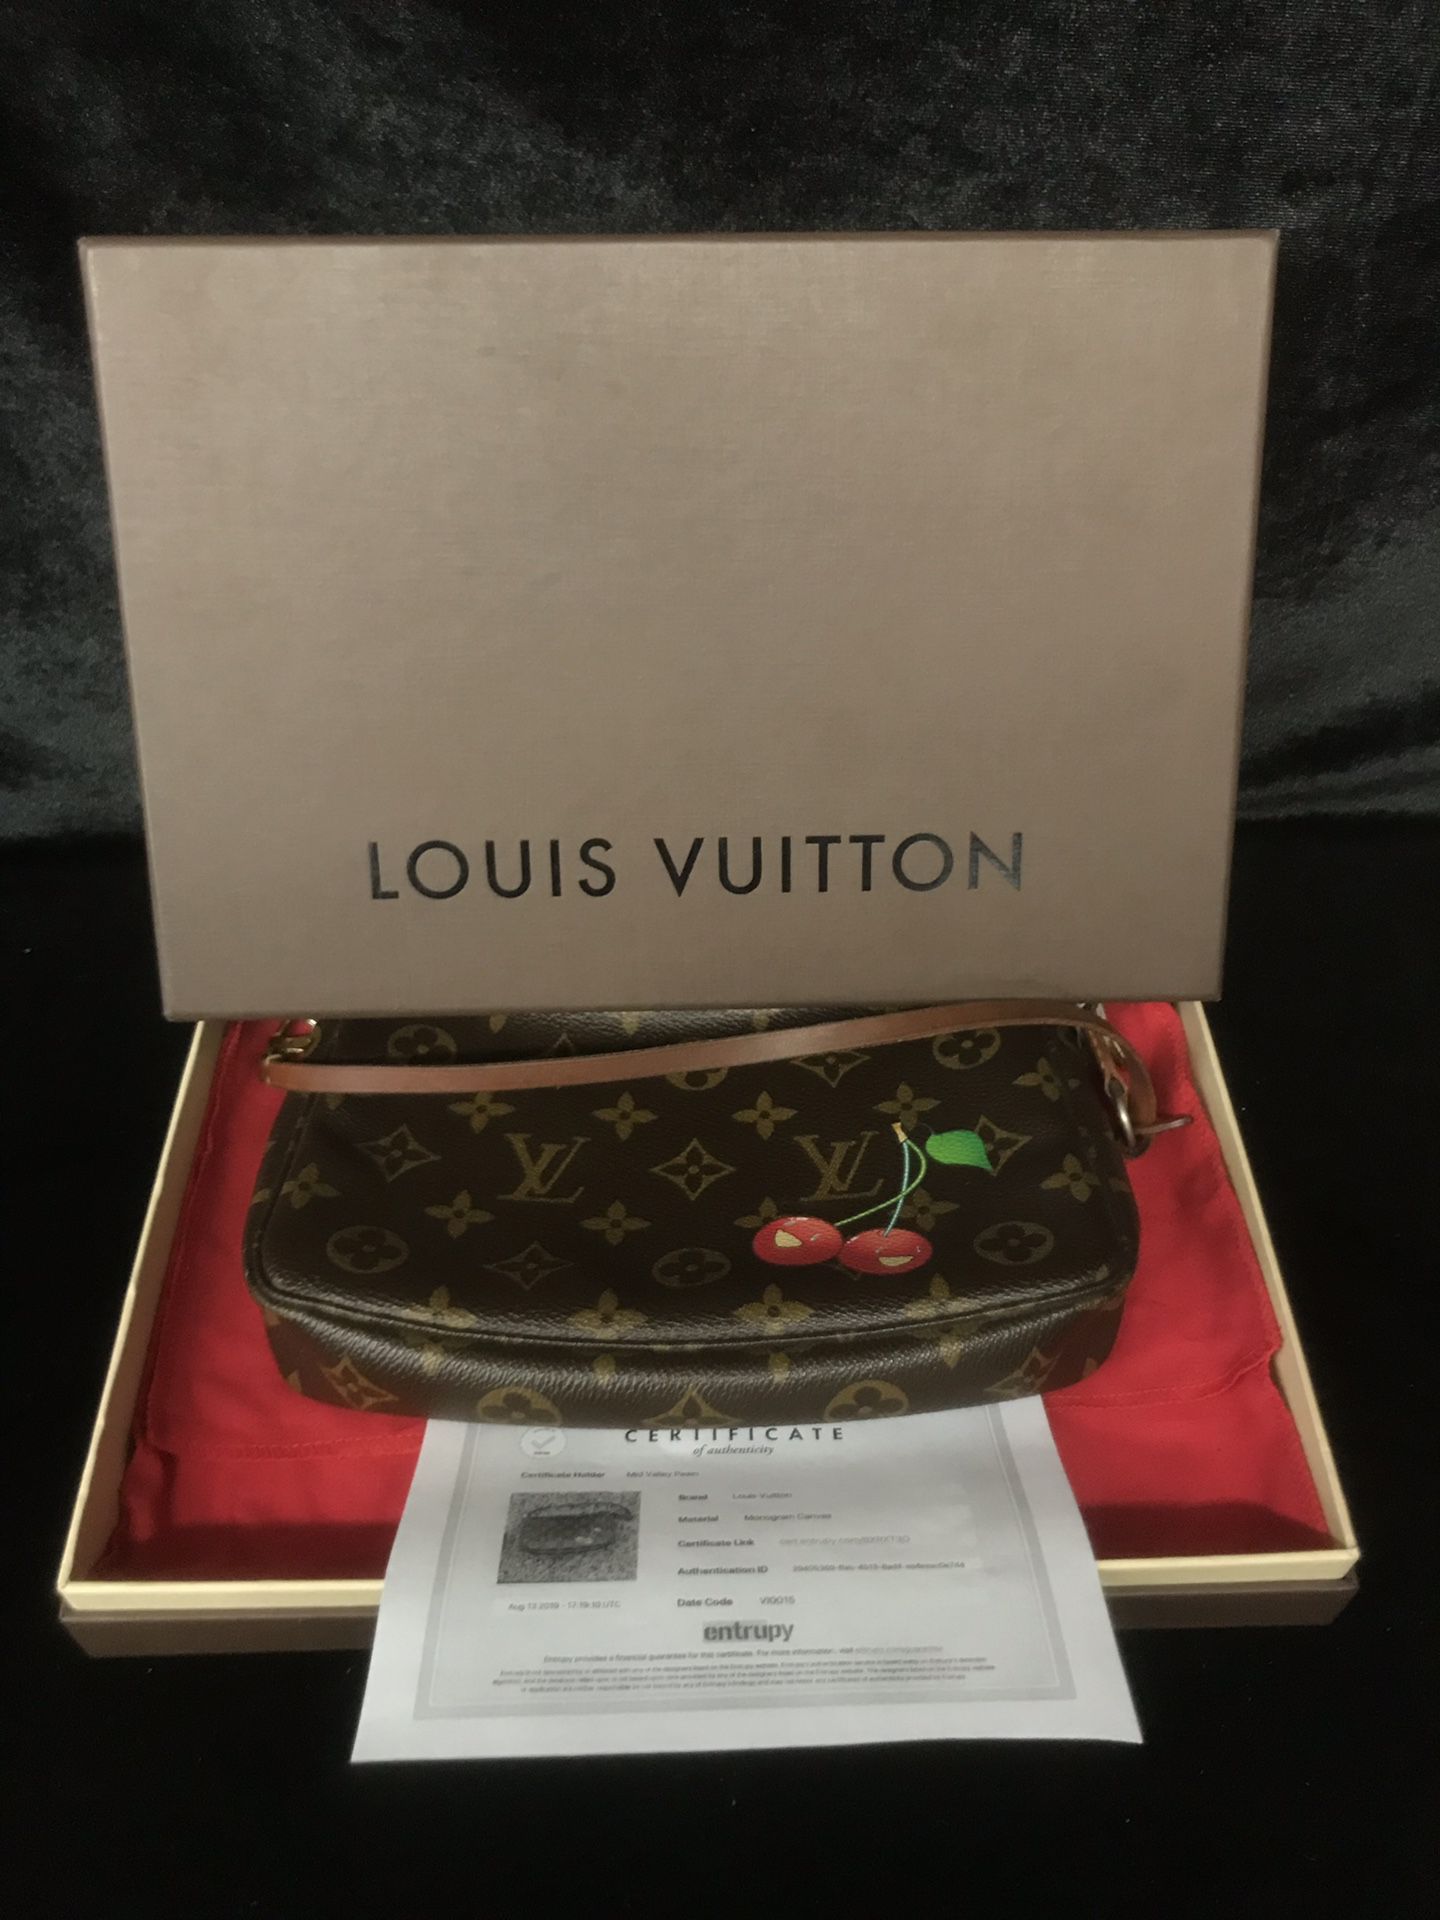 Louis Vuitton Pochette Accessories Limited Edition Monogram Cherry 869917 Brown Coated Canvas Hobo Bag